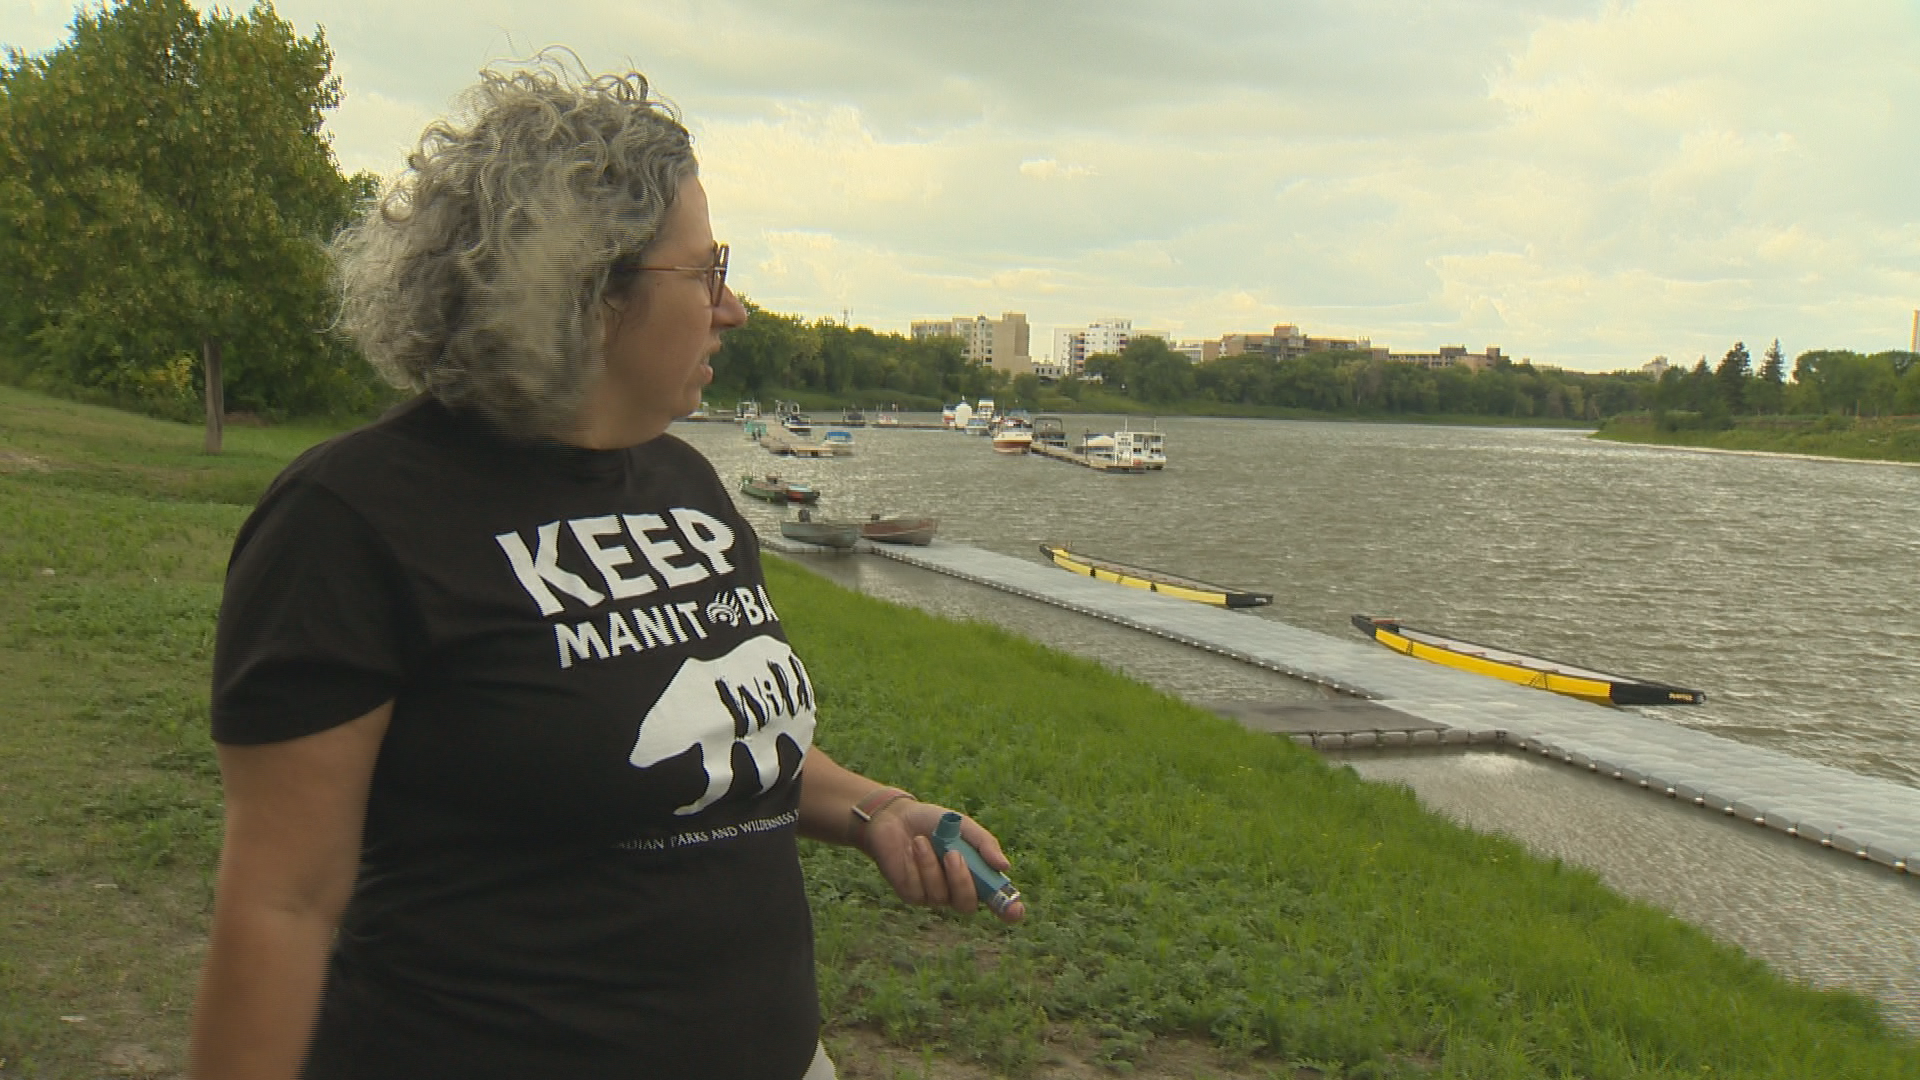 Mira Oberman, director of communications with the Canadian Parks and Wilderness Society in Manitoba, says her organization had to cancel an outdoor activity on Aug. 16 due to air quality warnings in Winnipeg.